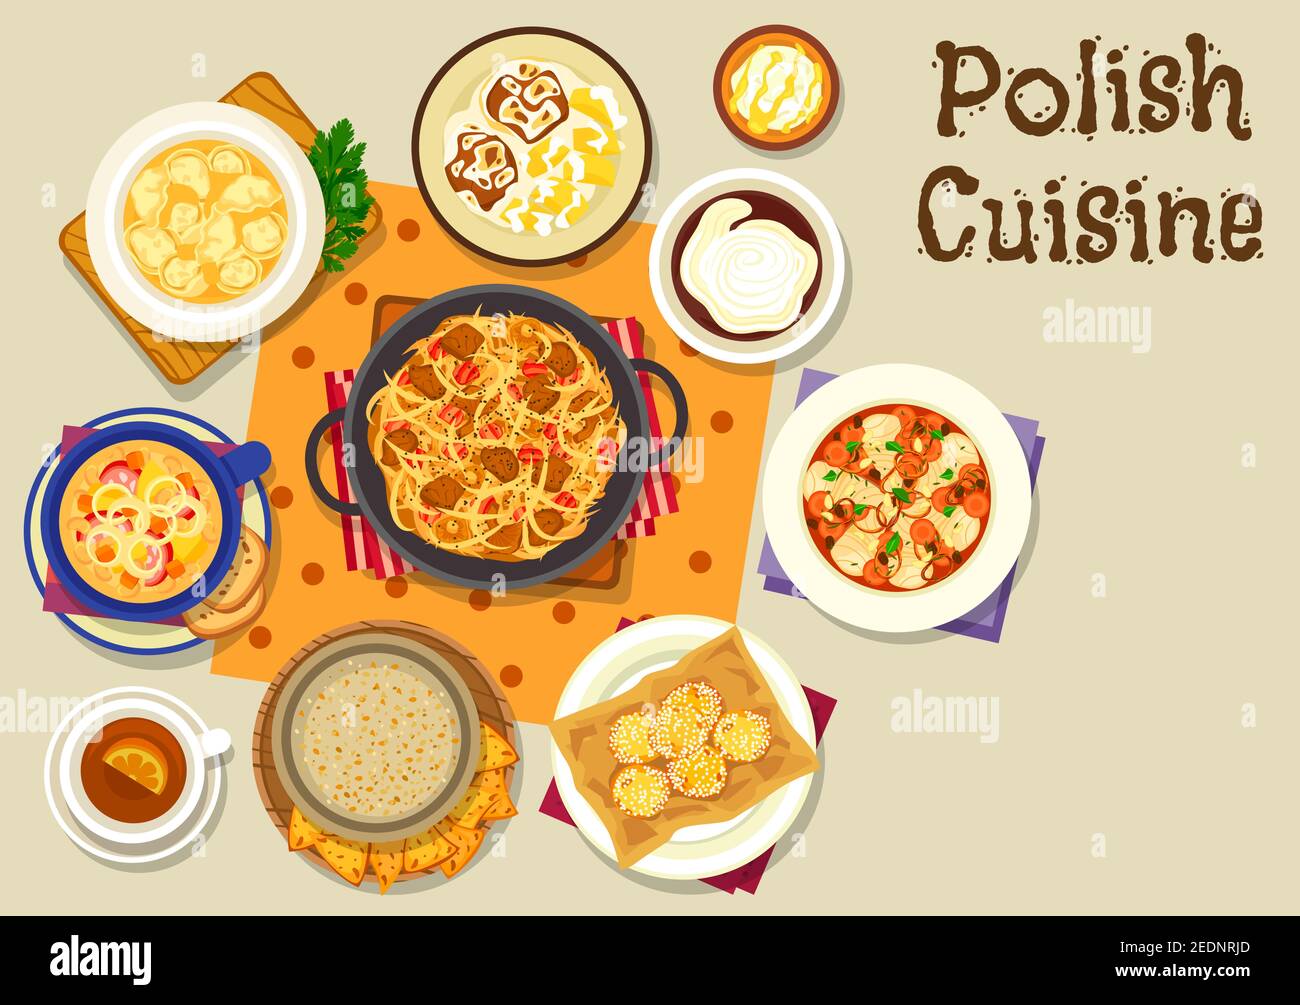 Polish cuisine tasty lunch icon with bean sausage soup, cabbage stew with sausage and ham, beer bread soup, meat dumplings, carp fish vegetable stew, Stock Vector